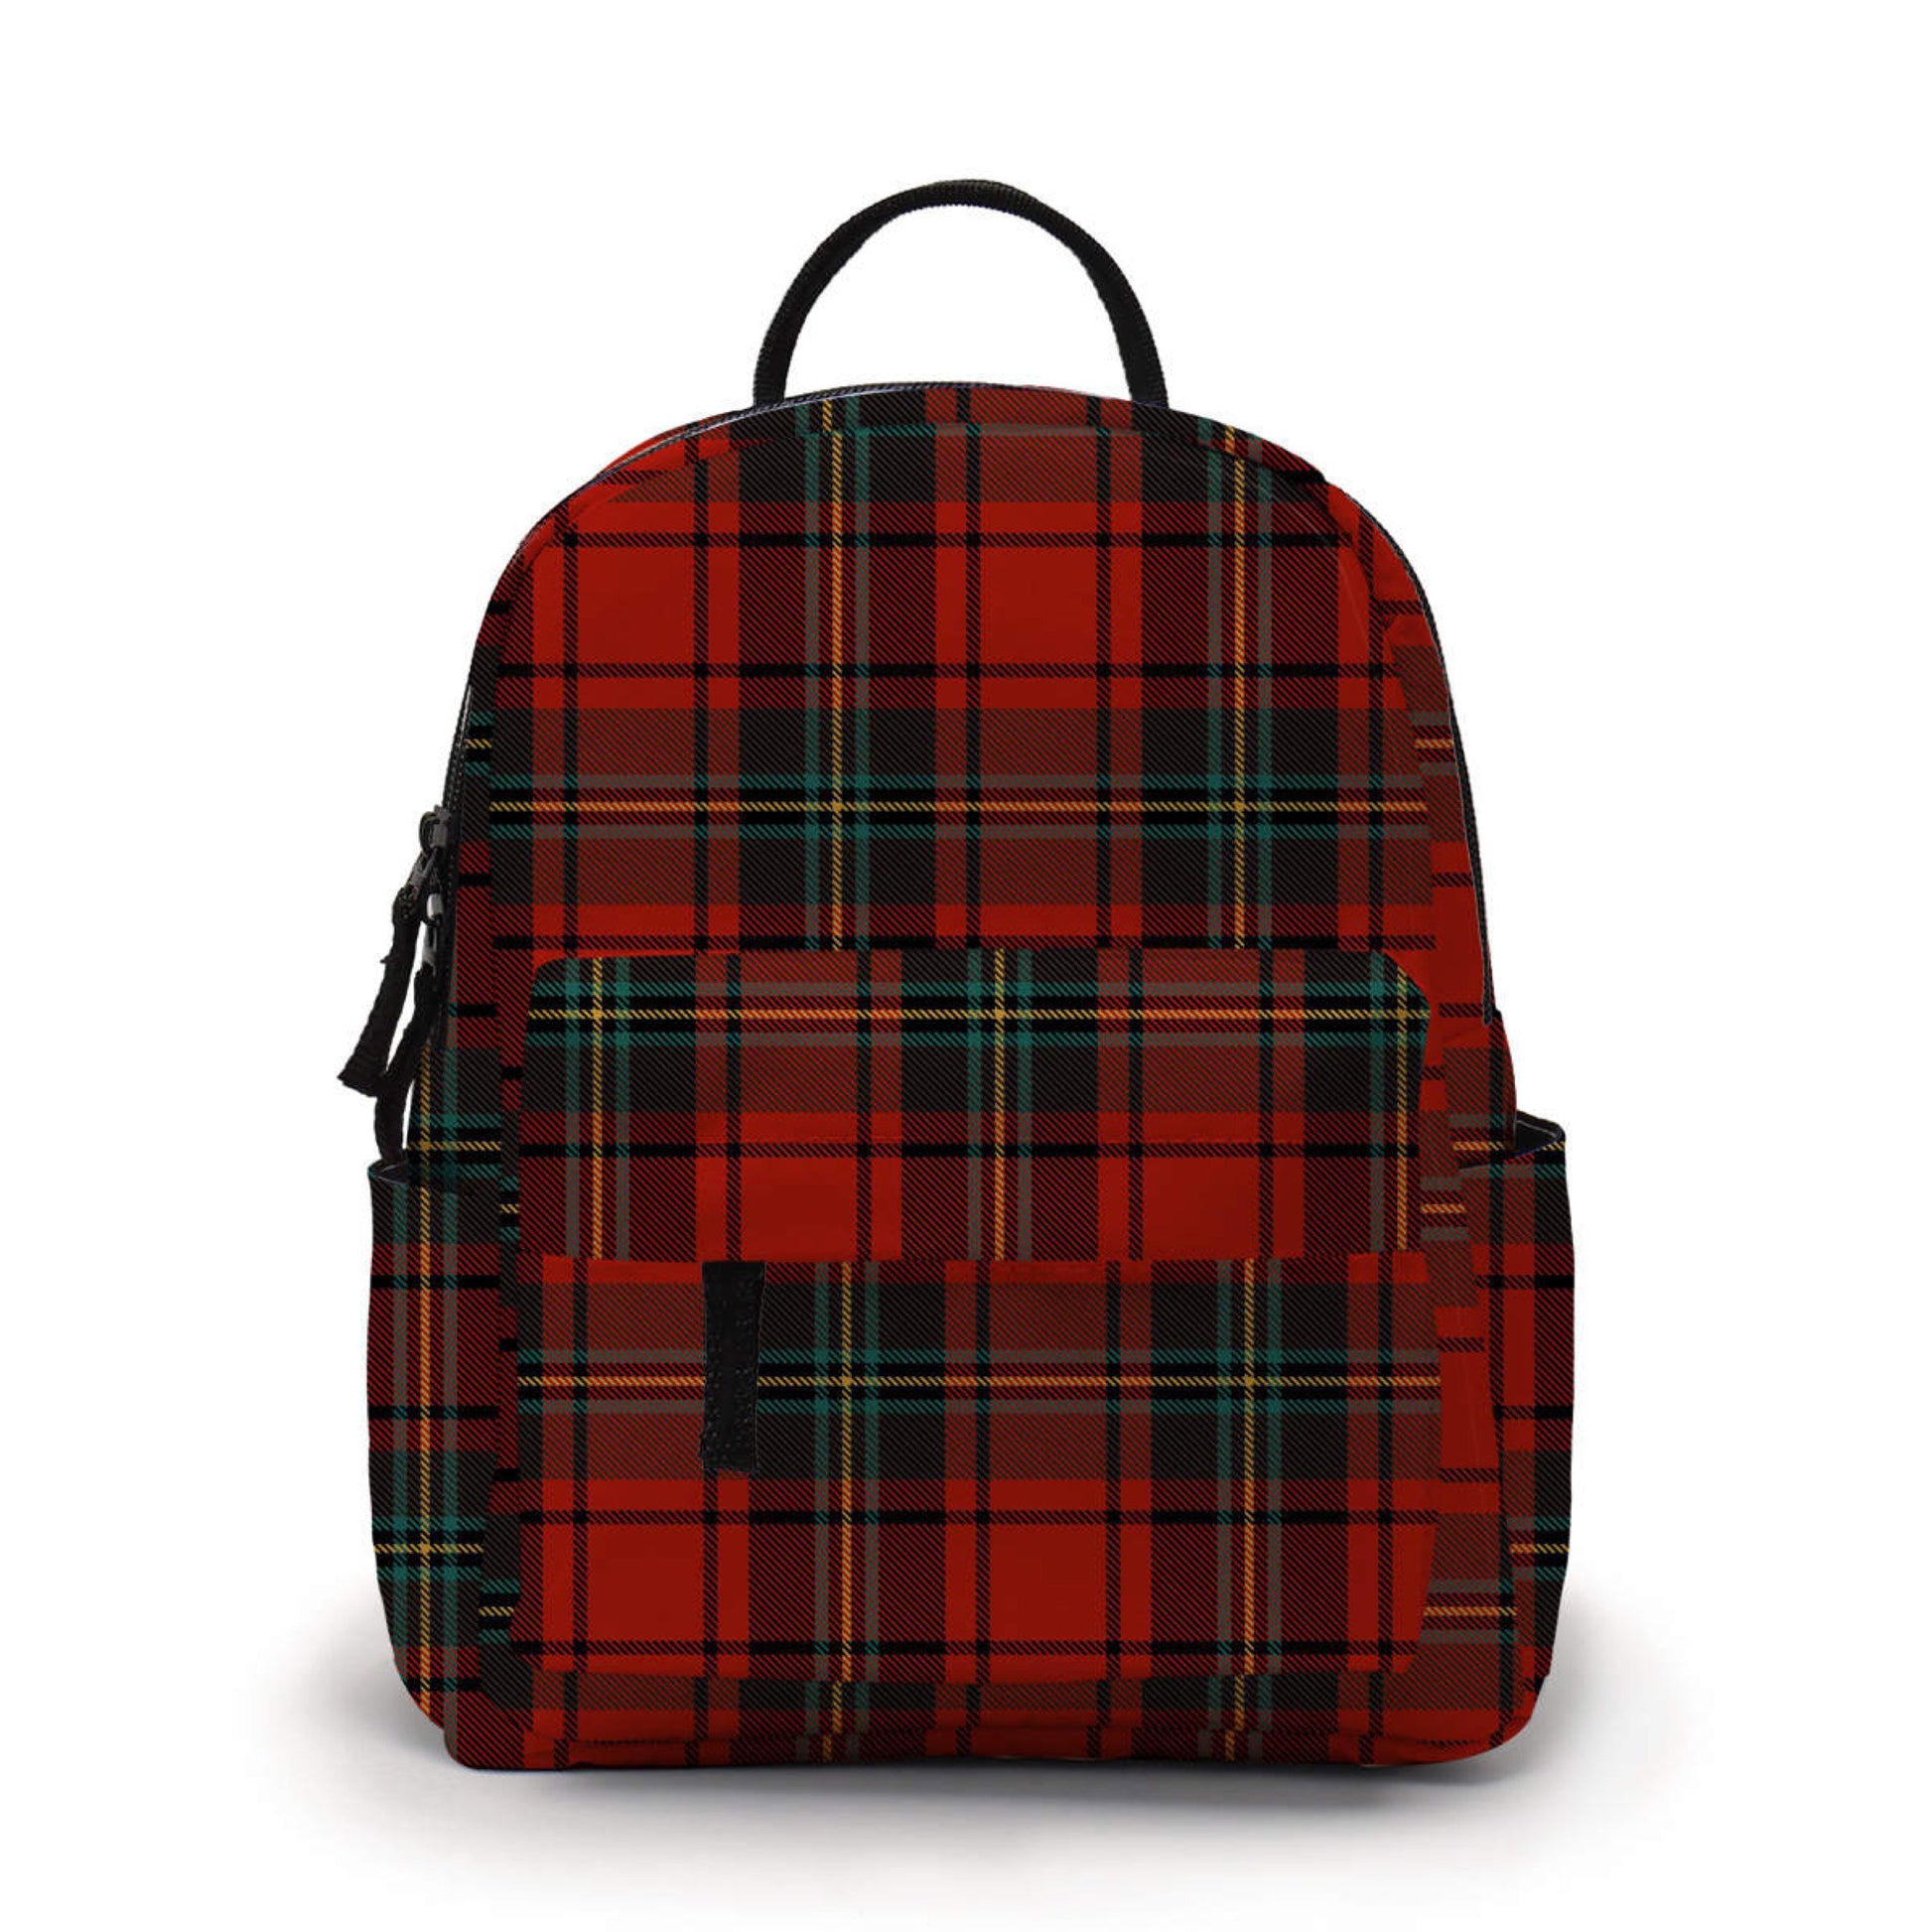 Mini Backpack - Plaid Green Red - Three Bears Boutique